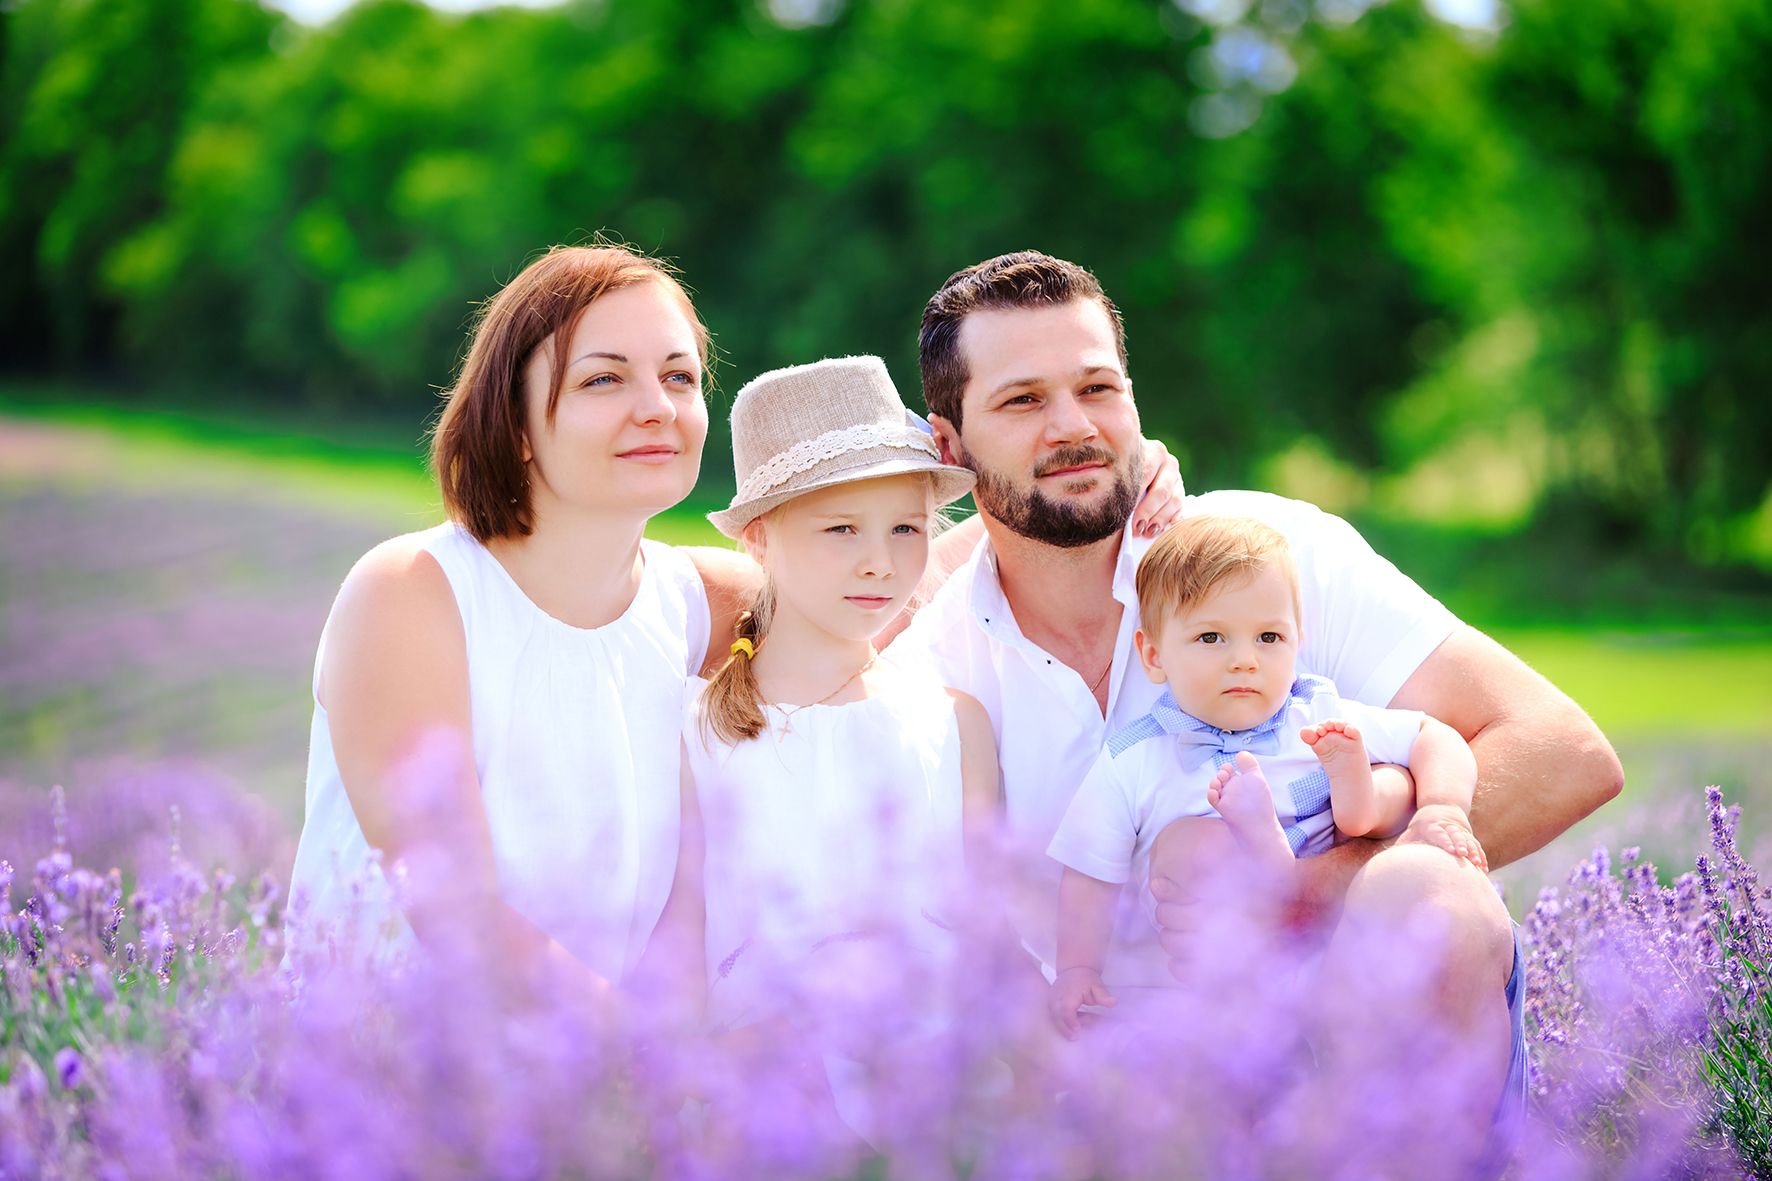 Family portrait with best photographers and professional videographers team – VIO IMAGE